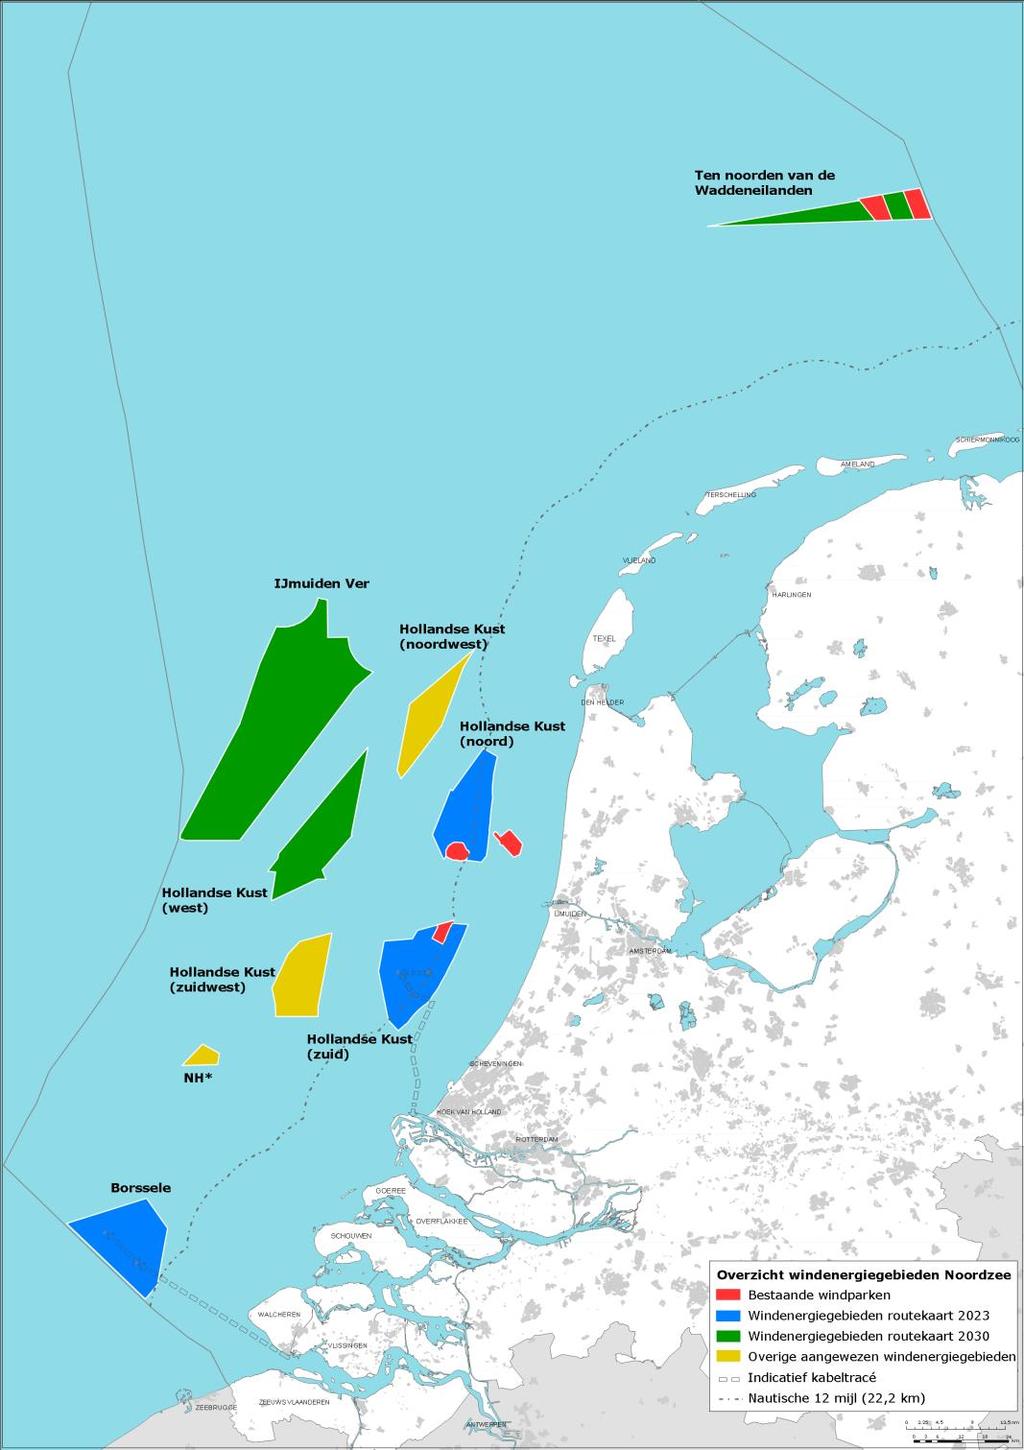 Current Approach Clear pipeline of projects Wind farm site GW tender operational 1 Borssele I and II 2 x 0.35 2016 2020 2 Borssele III and IV 2 x 0.35 2016 2020 3 HK zuid I and II 2 x 0.